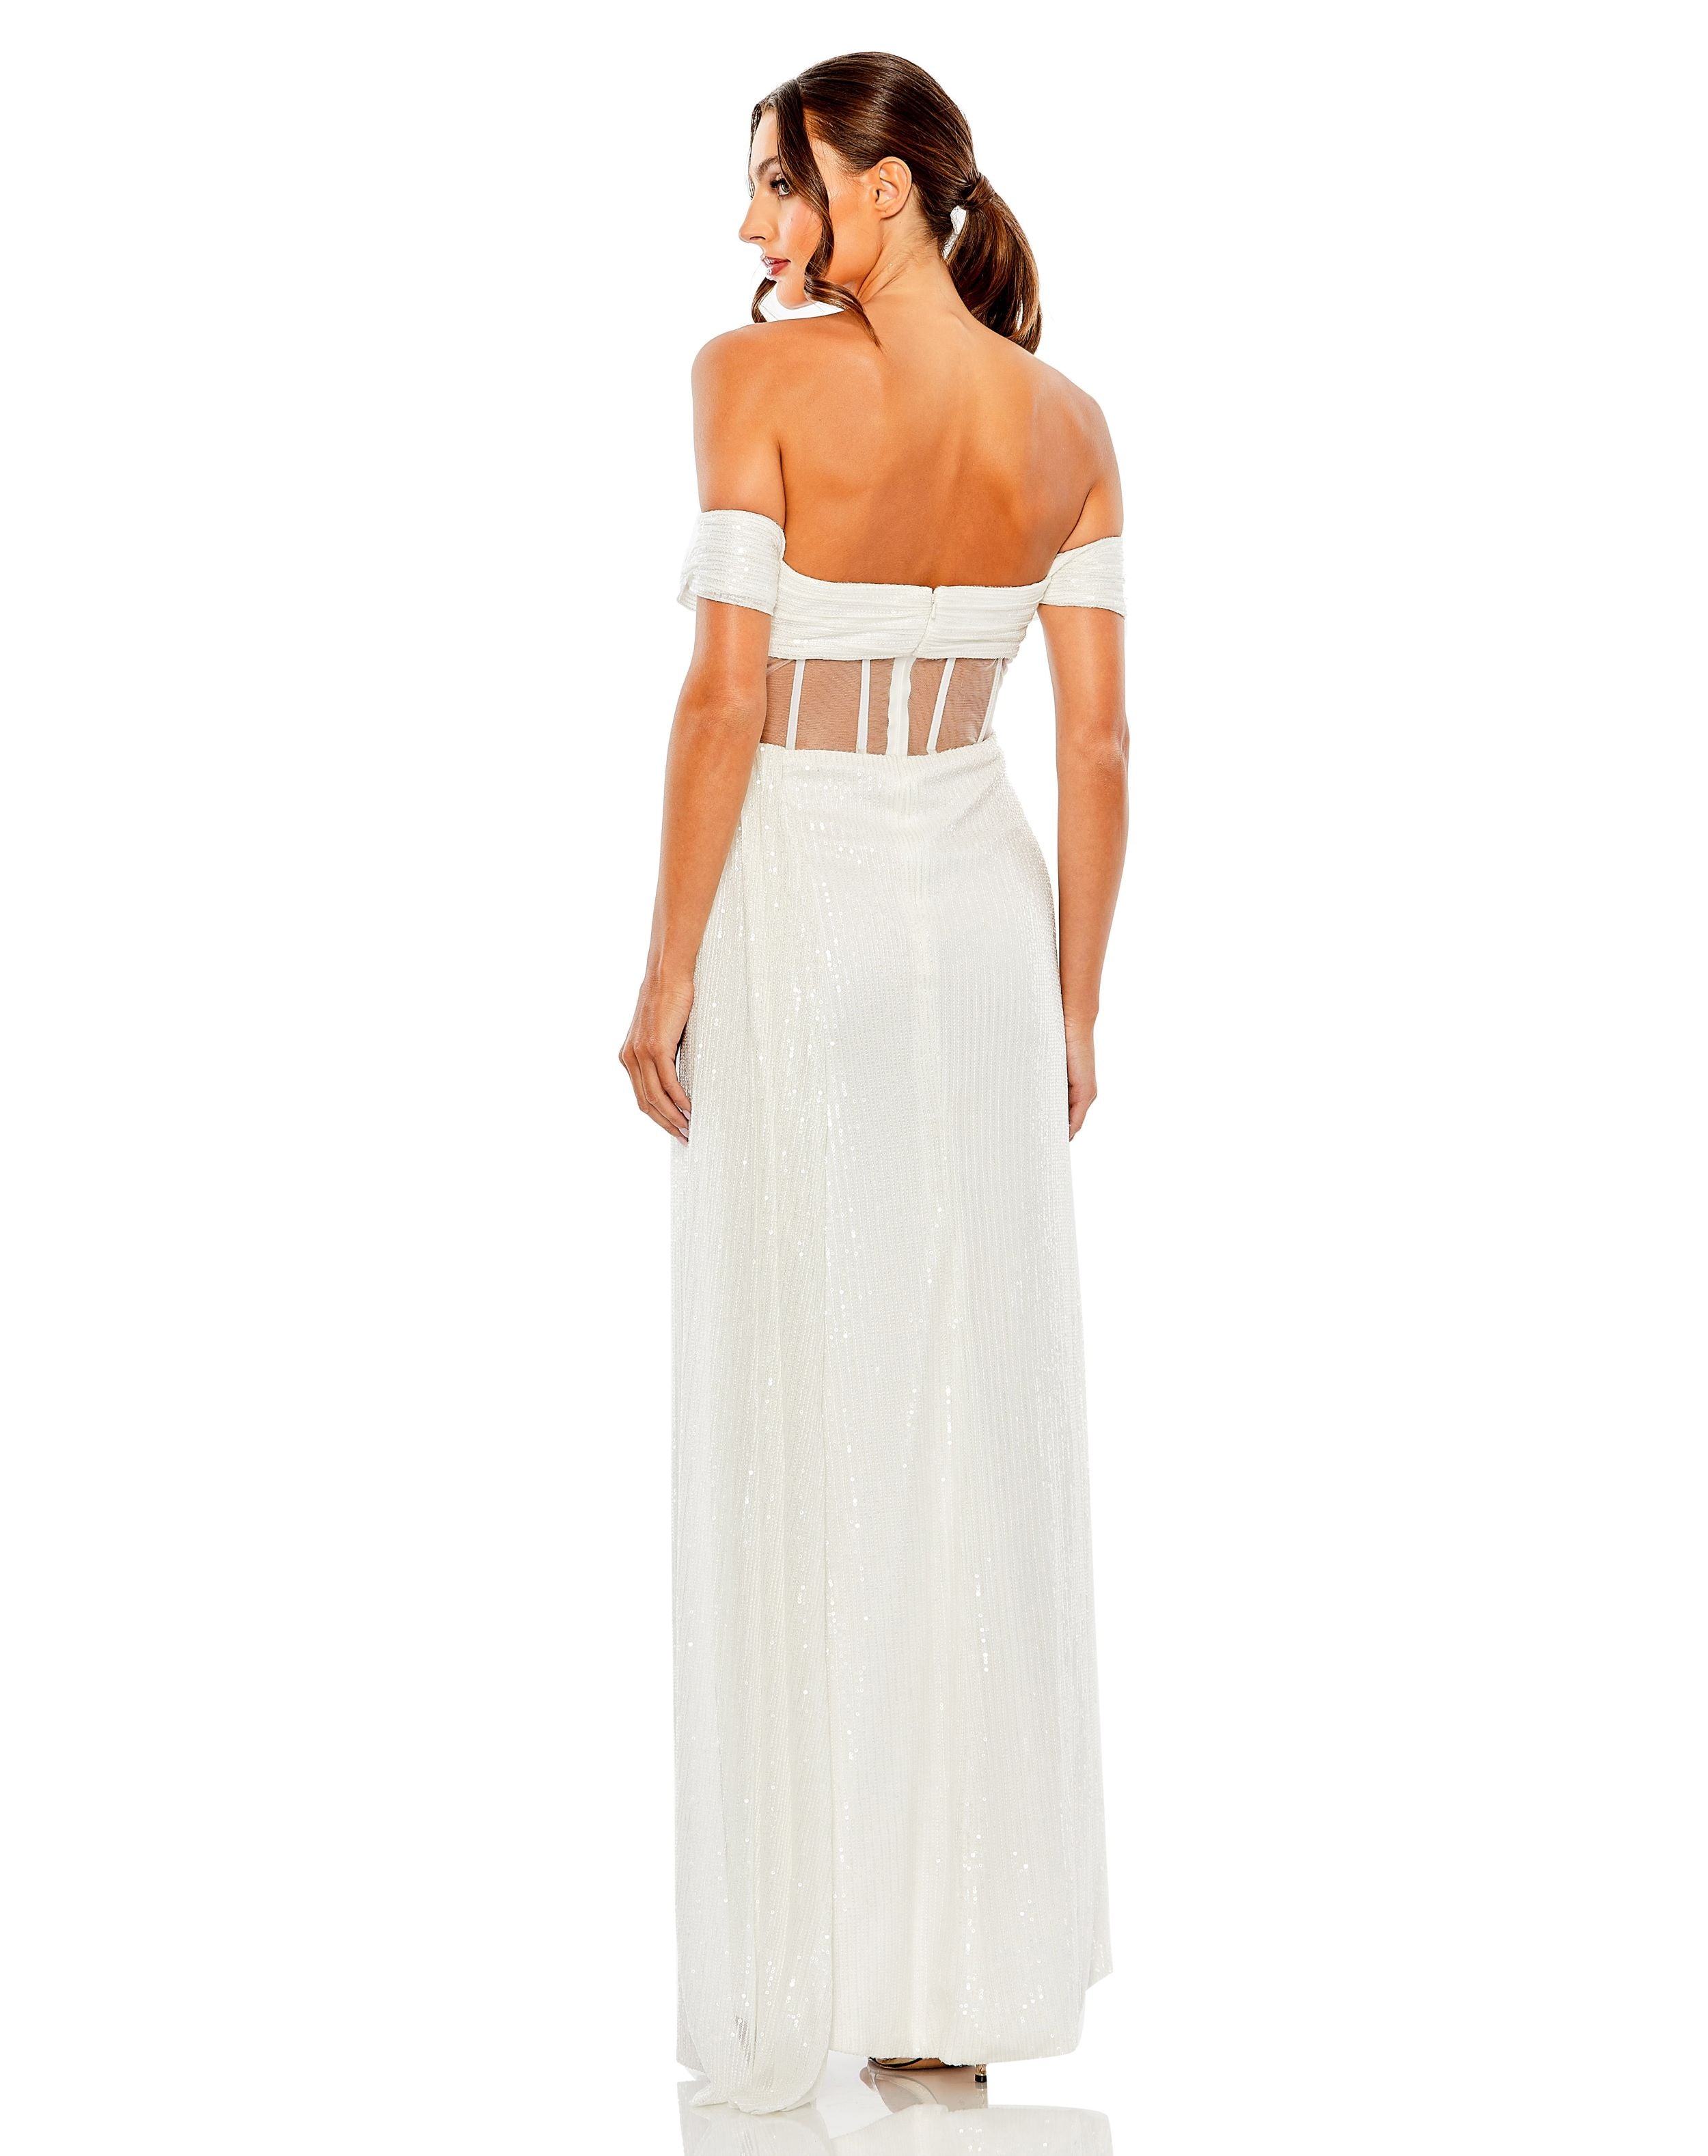 Sequined Gown with Sheer Corset Waist and Slit | Sample | Sz. 2